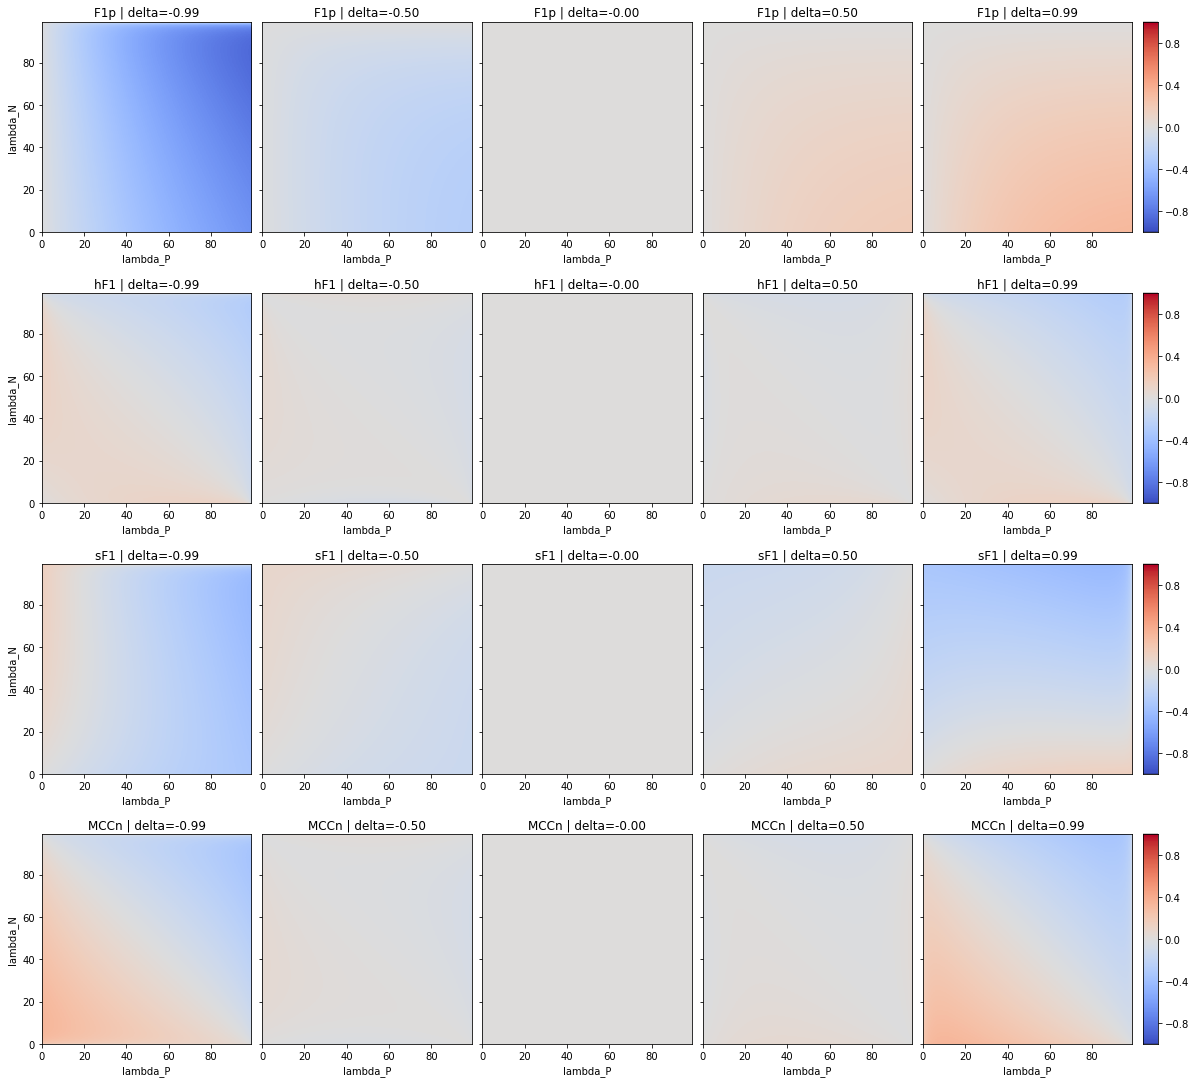 Figure 4.12. Comparison between the biases of (top to bottom) the F1_{P}, the hF_{1}, the sF_{1} and the MCC_{n} with imbalanced datasets in binary classification tasks.